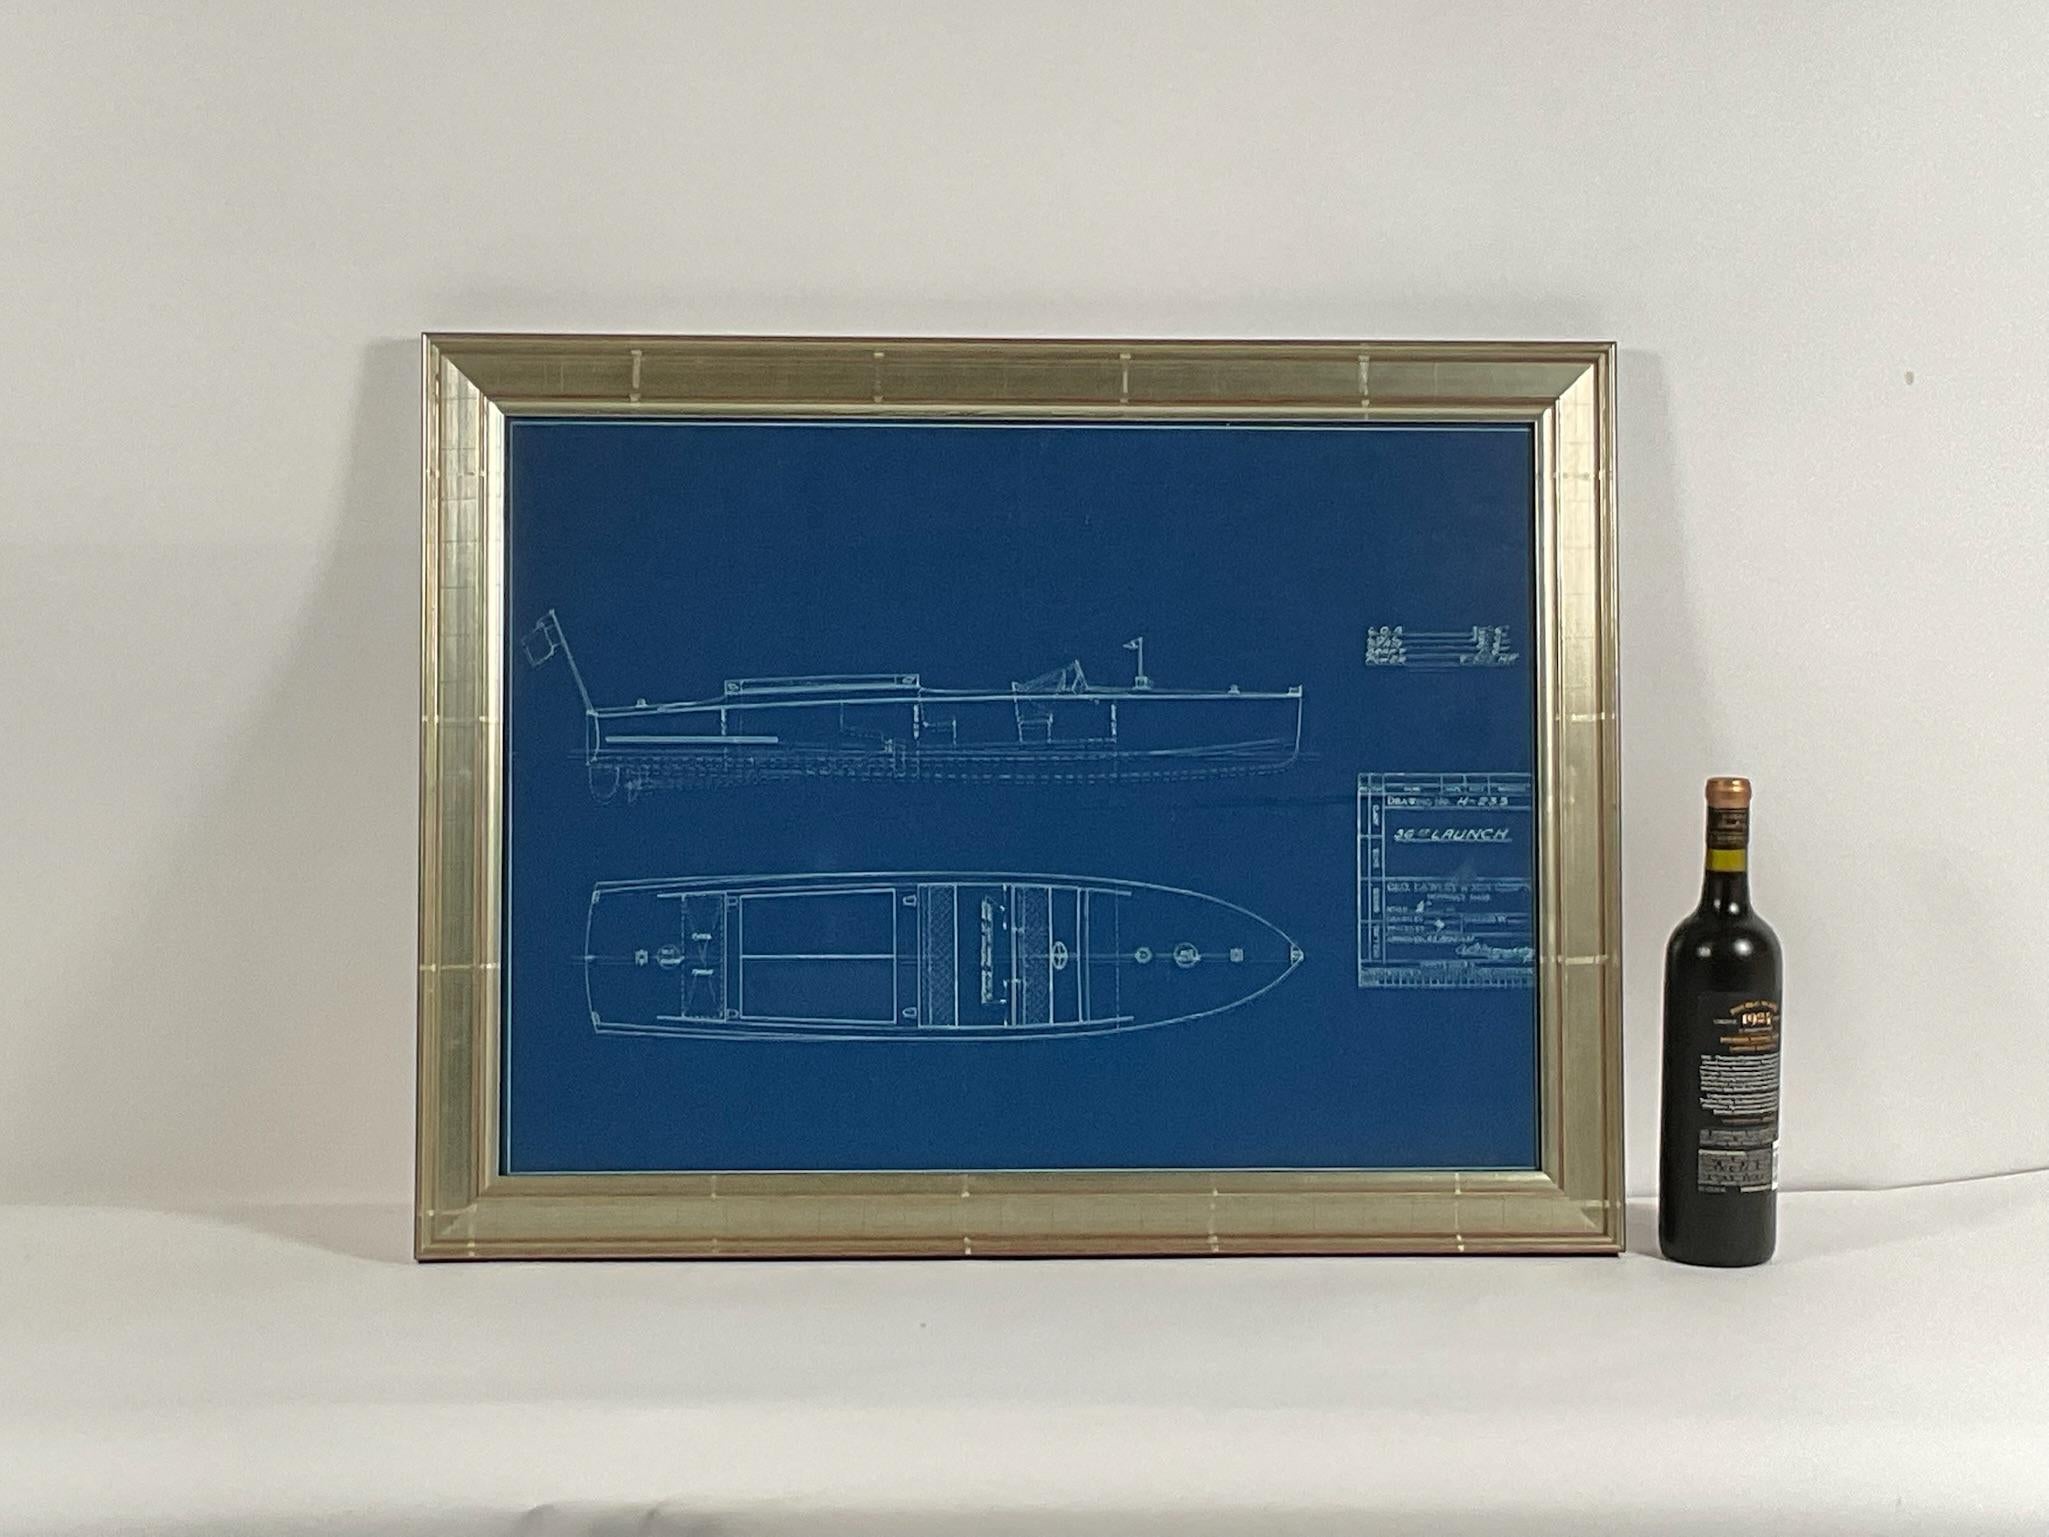 George Lawley blueprint of a thirty six foot launch. The legend shows drawing H-233, 36 ft. launch, one half inch to the foot. George Lawley and Son Corporation, Neponset Mass. Approved 23 September 1931. A Morrisey, Chief Draftsman. L.O.A. 36' 6